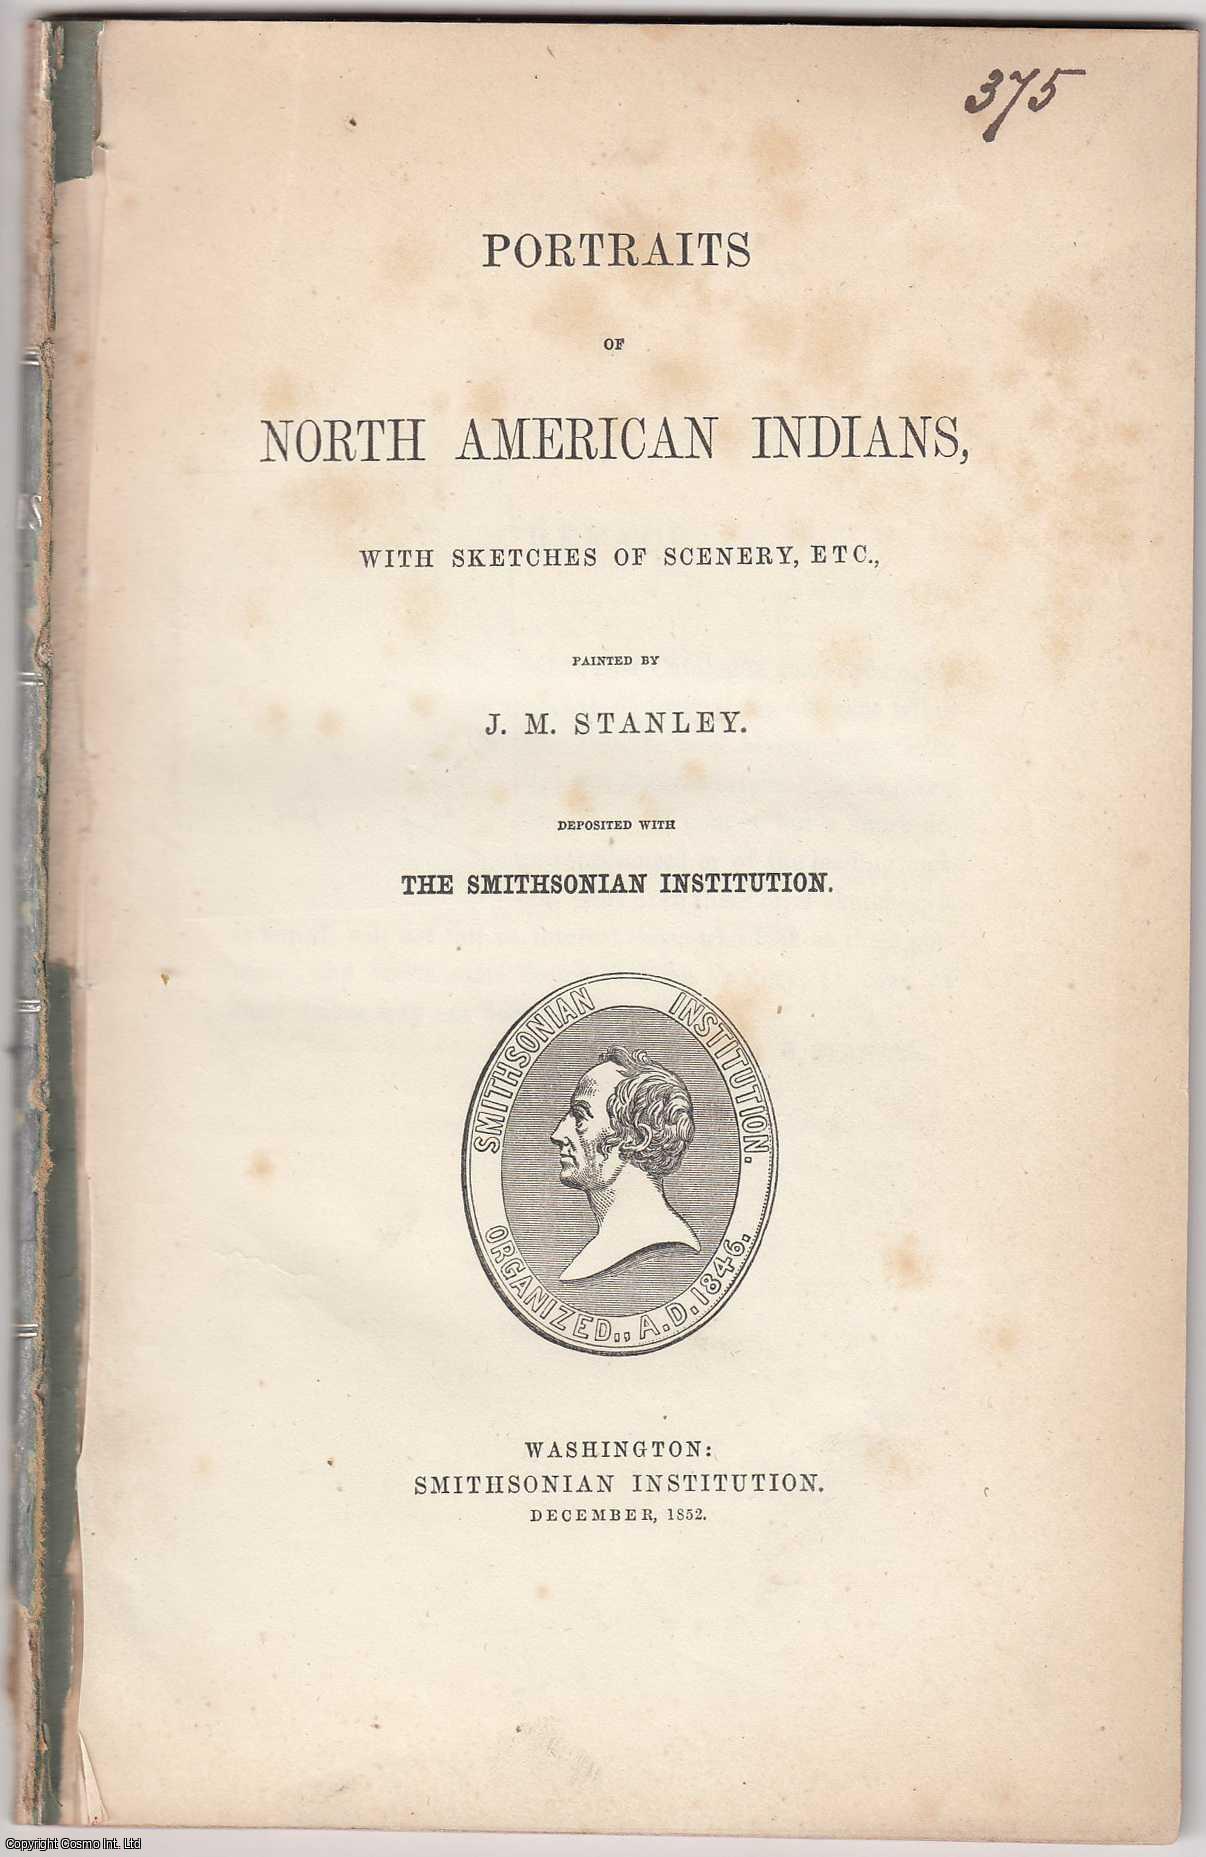 --- - [1852 Catalogue] Portraits of North American Indians, with Sketches of Scenery, Etc., Painted by J.M. Stanley. Deposited with the Smithsonian Institution.